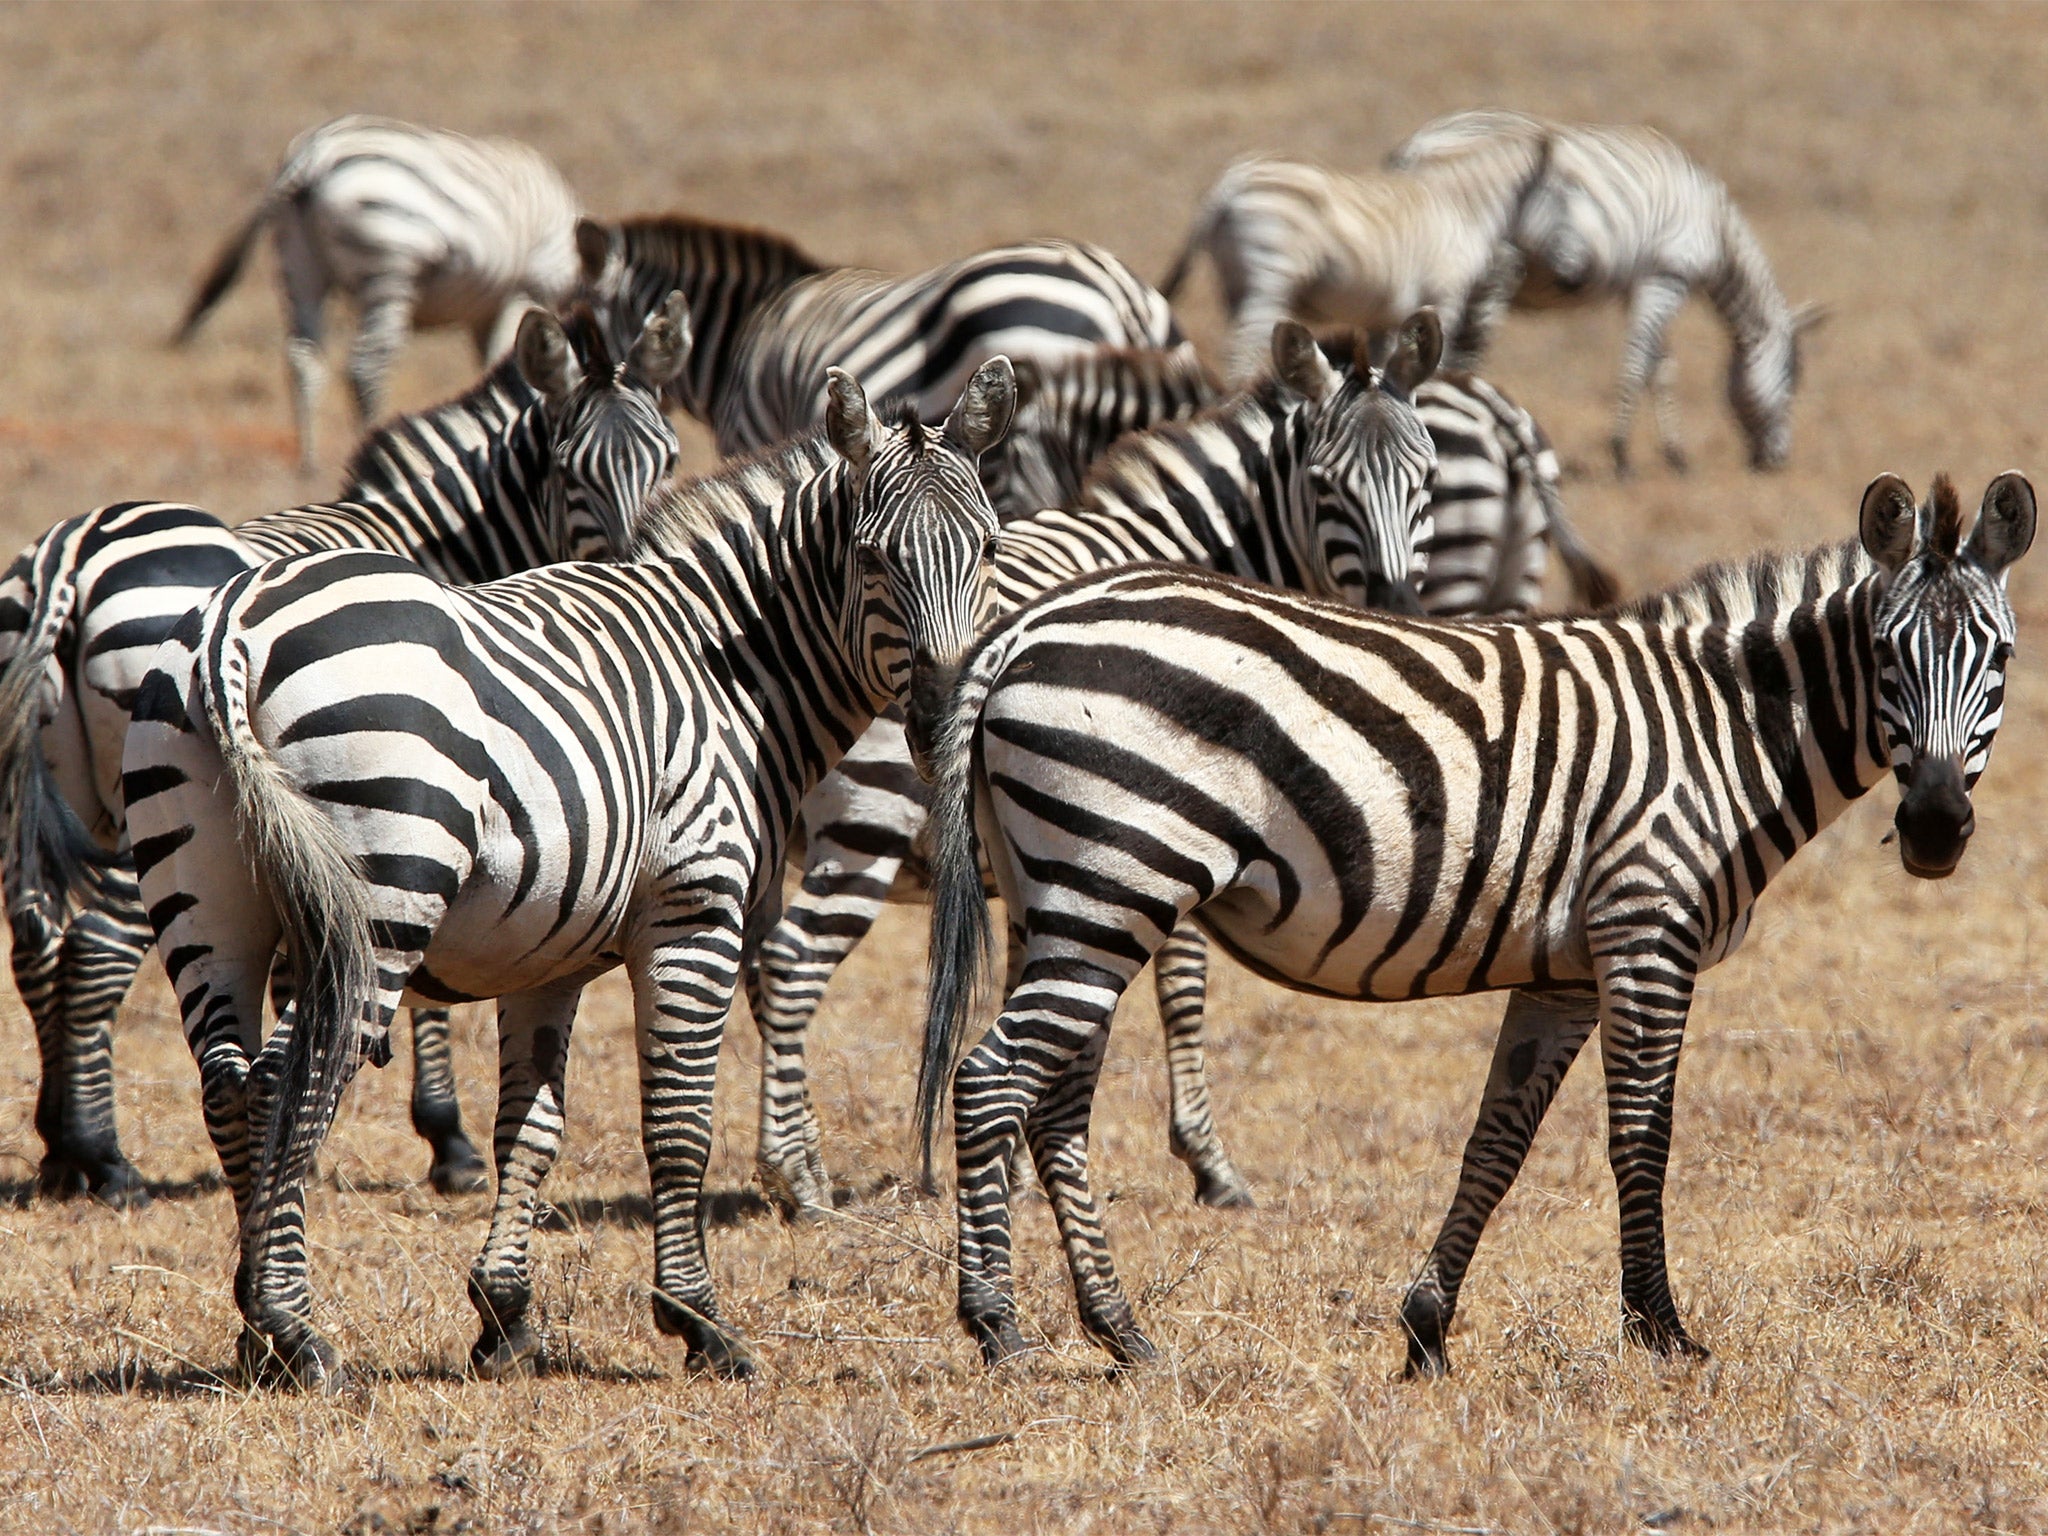 Bright-striped zebras are easier to catch than uniformly coloured prey, the report claims